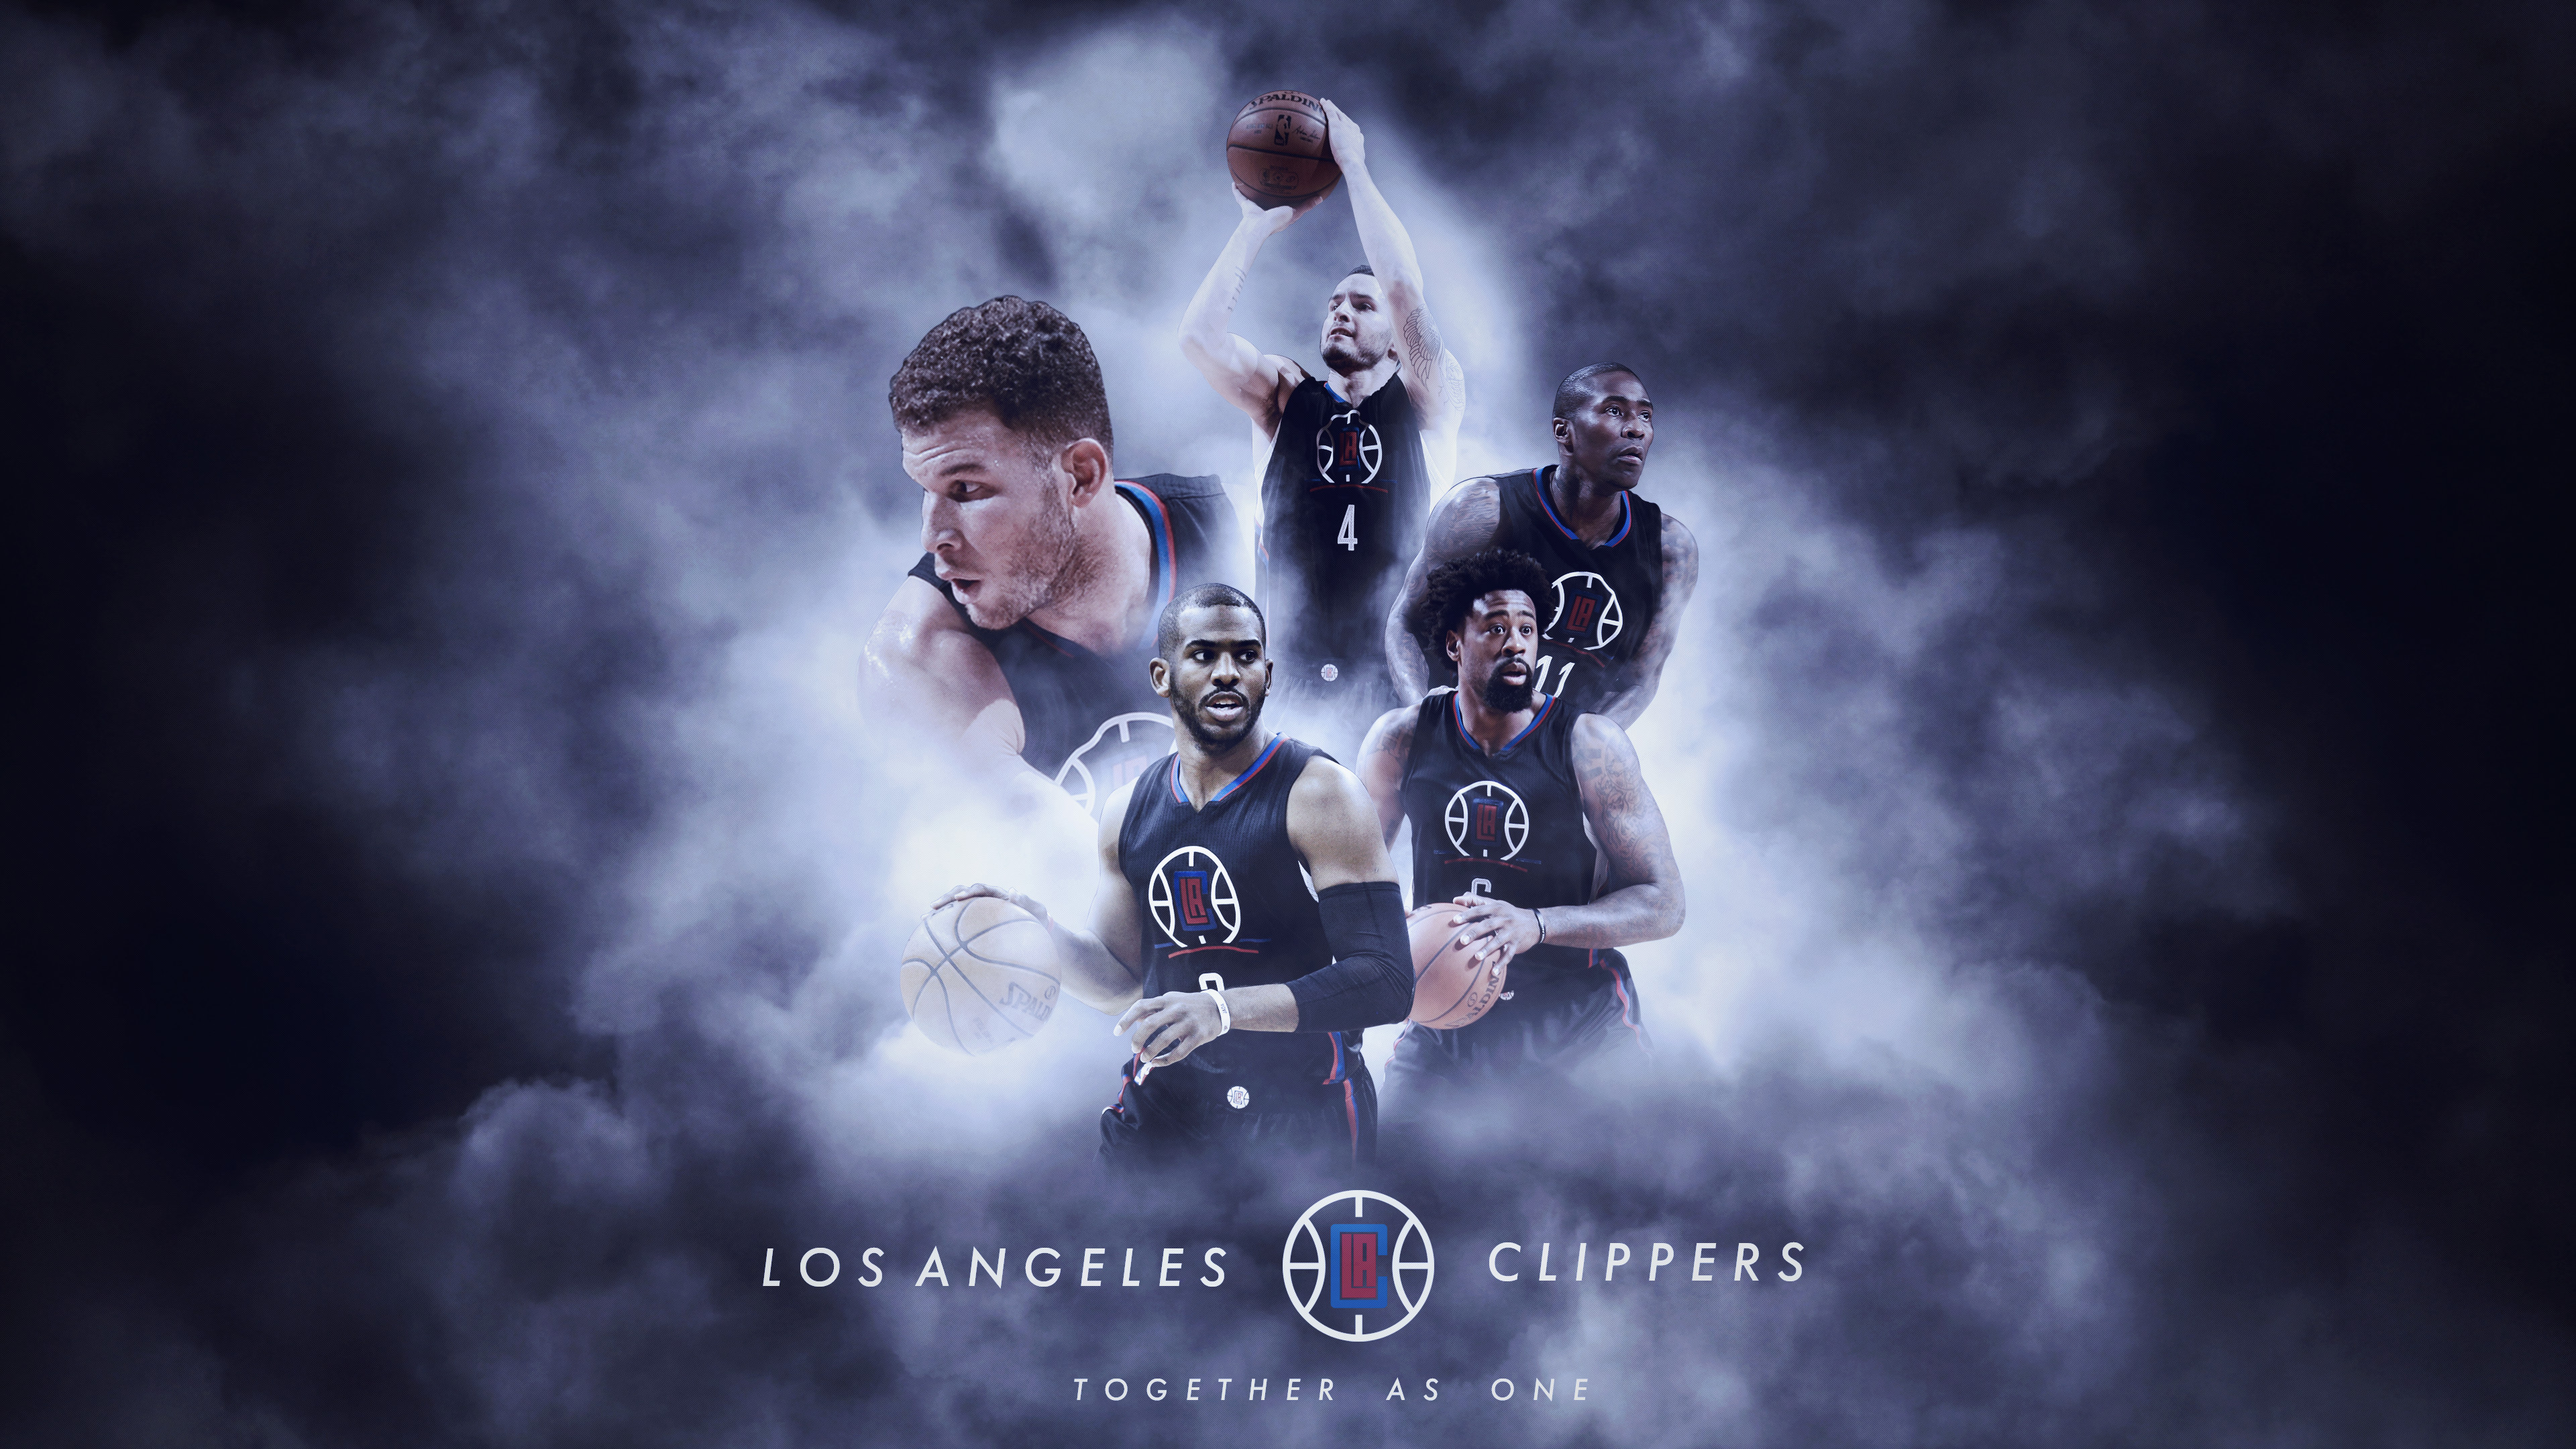 Lukemphotography La Clippers Together As One By Lukemphotography 3840x2160